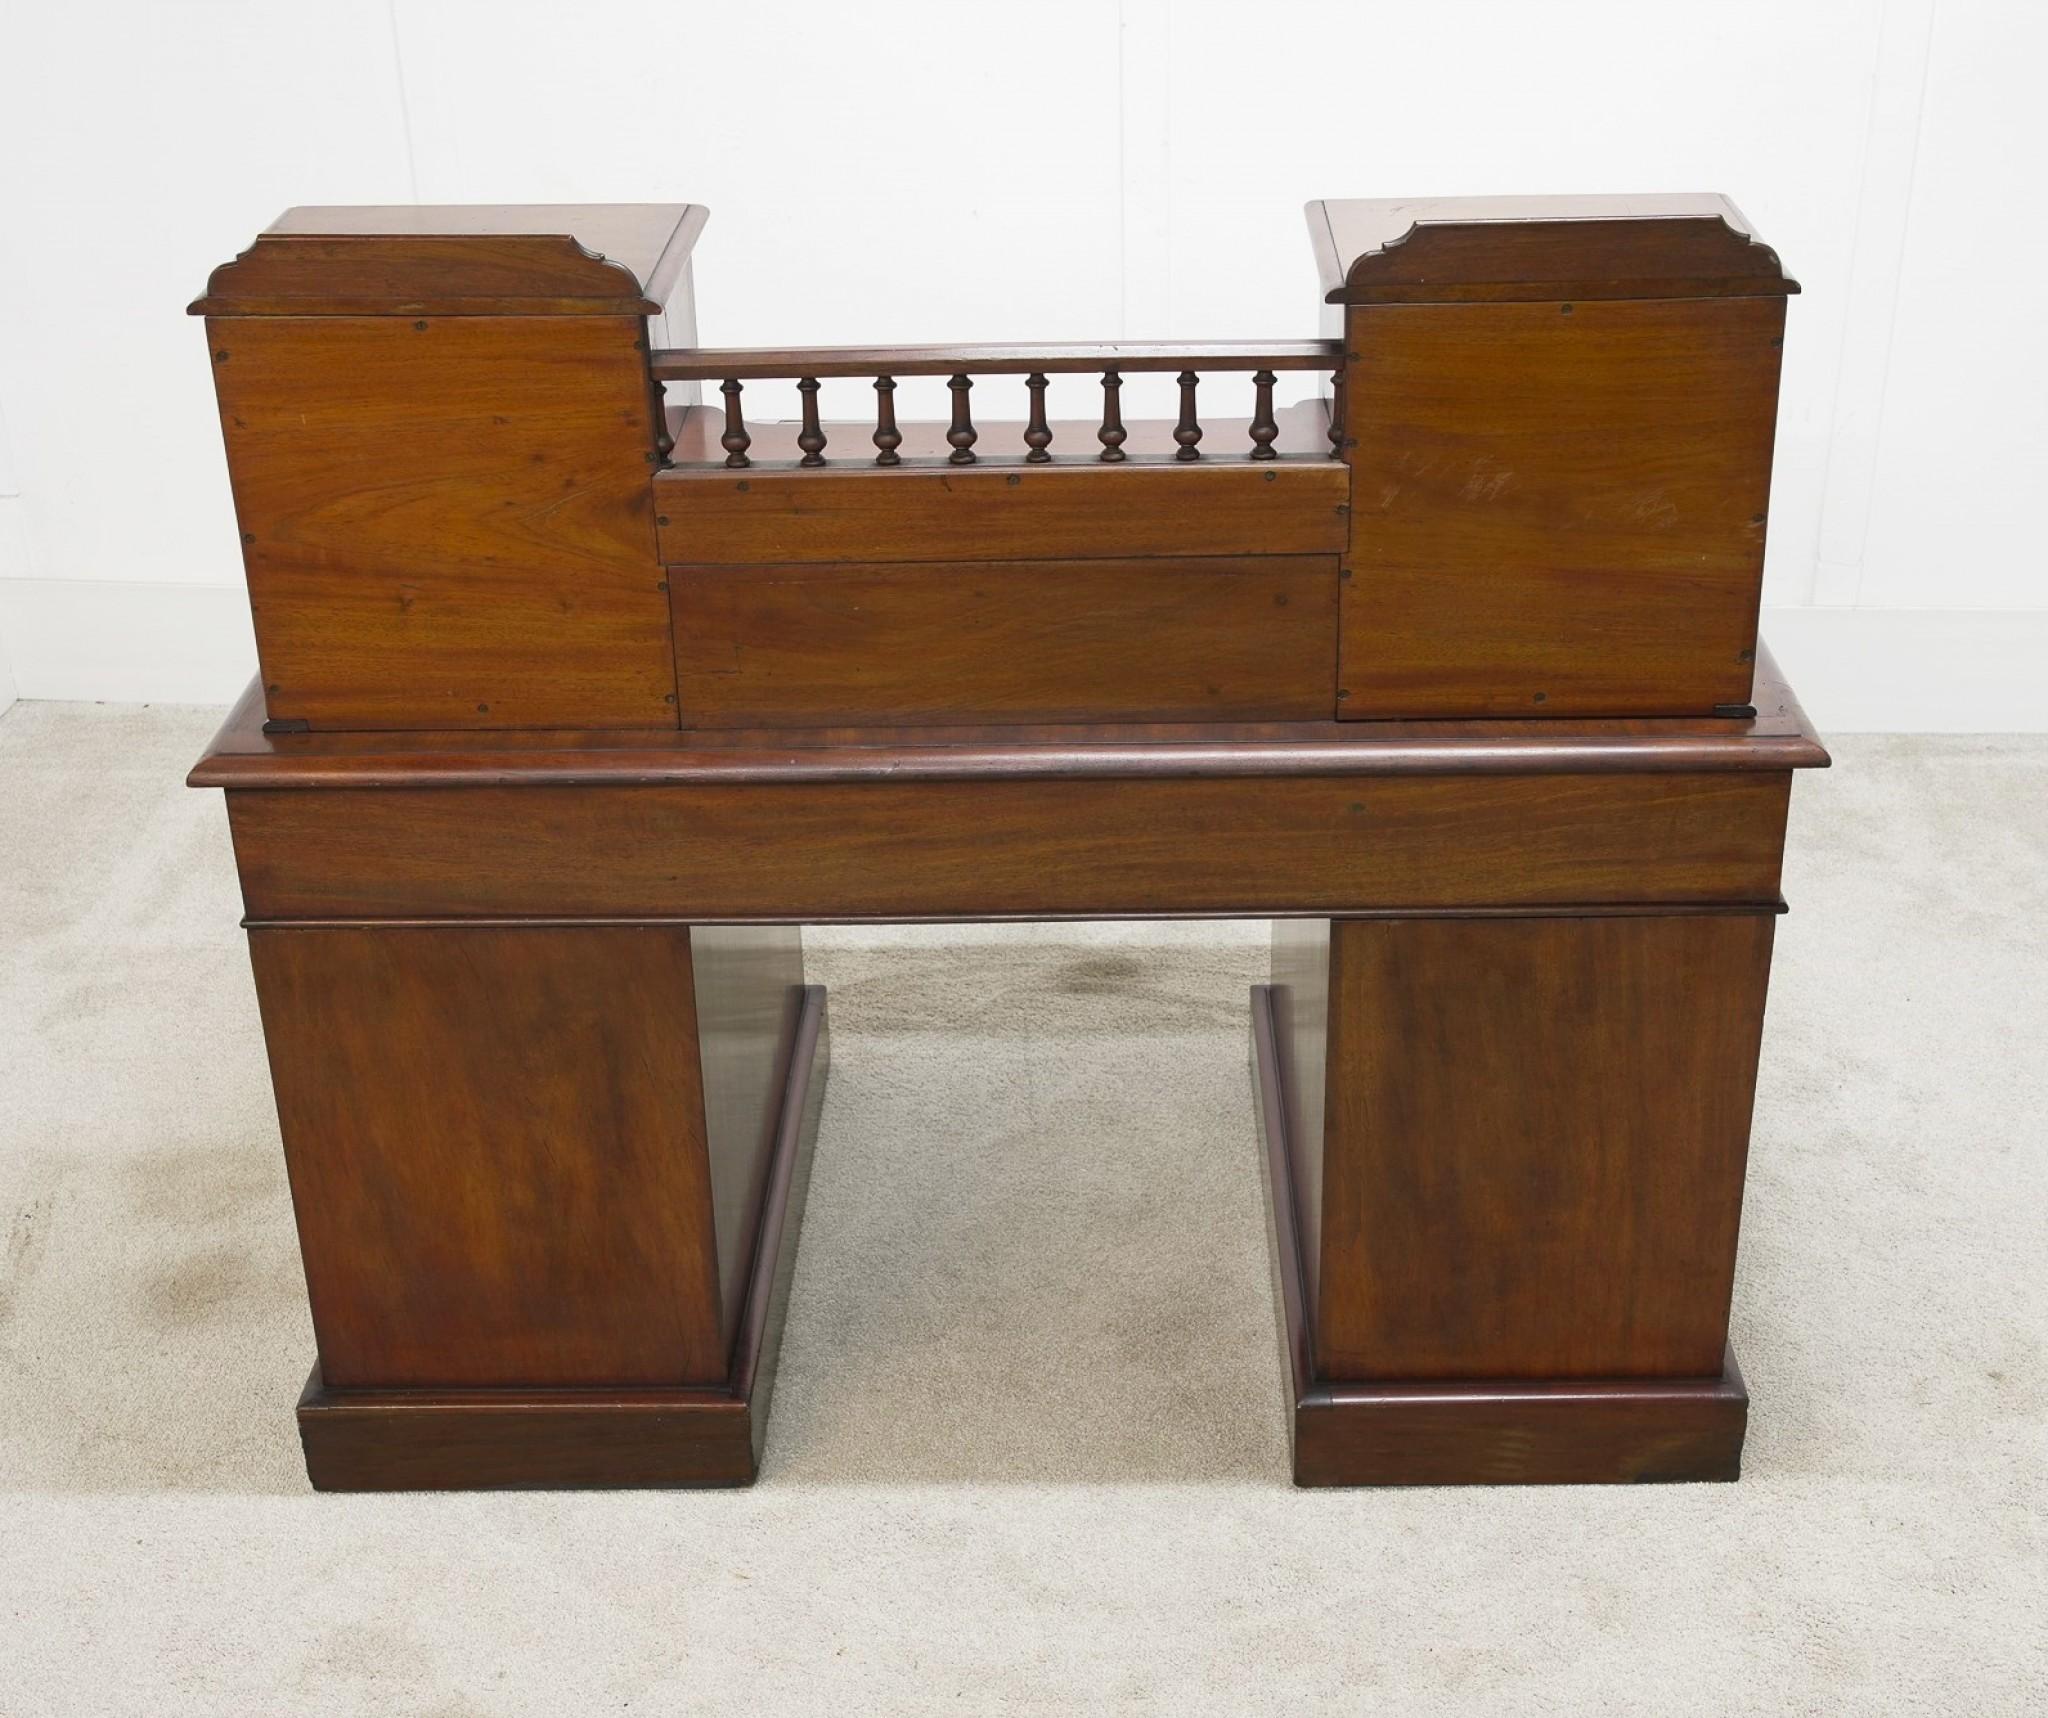 Victorian Charles Dickens Desk Mahogany Writing Table 1880 In Good Condition For Sale In Potters Bar, GB